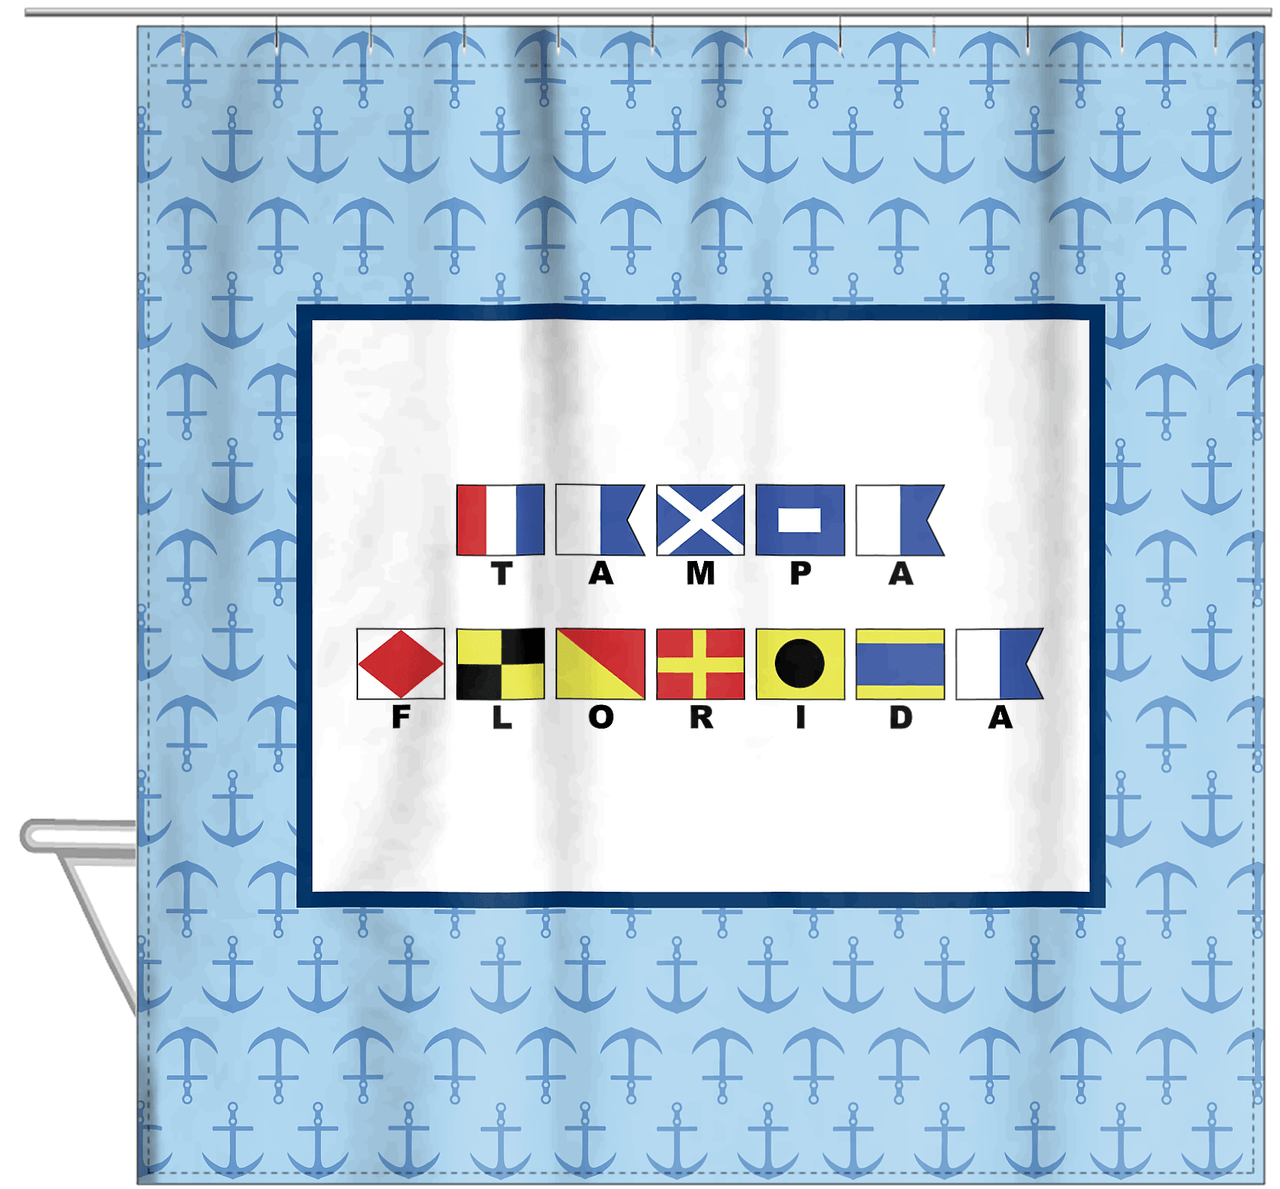 Personalized Nautical Flags Shower Curtain with Anchors - Blue and Navy - Flags with Small Letters - Hanging View